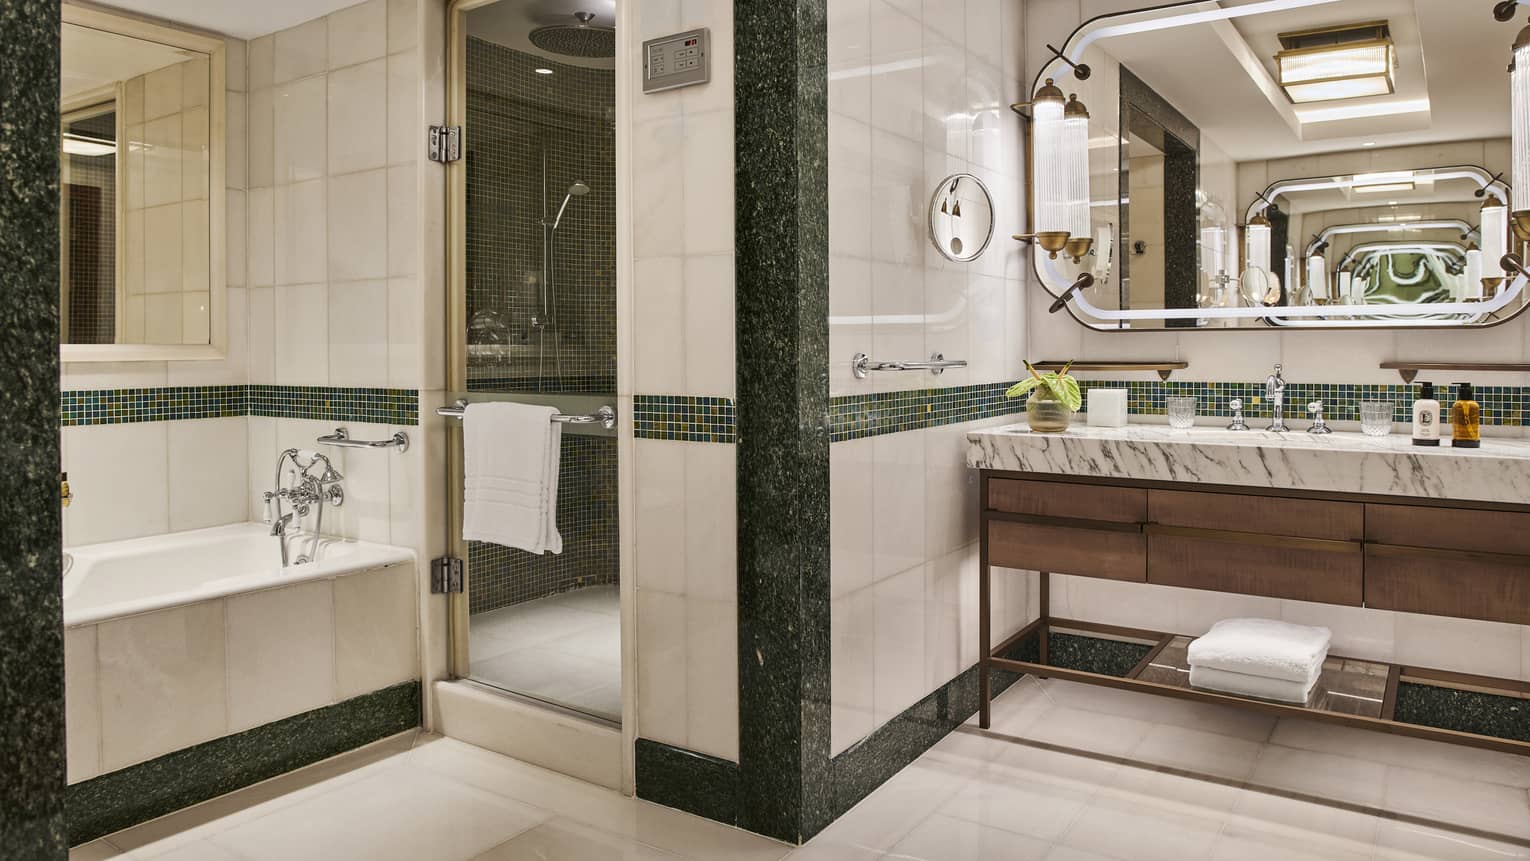 Modern full marble bathroom with soaking tub, double vanity and large mirror with sconces